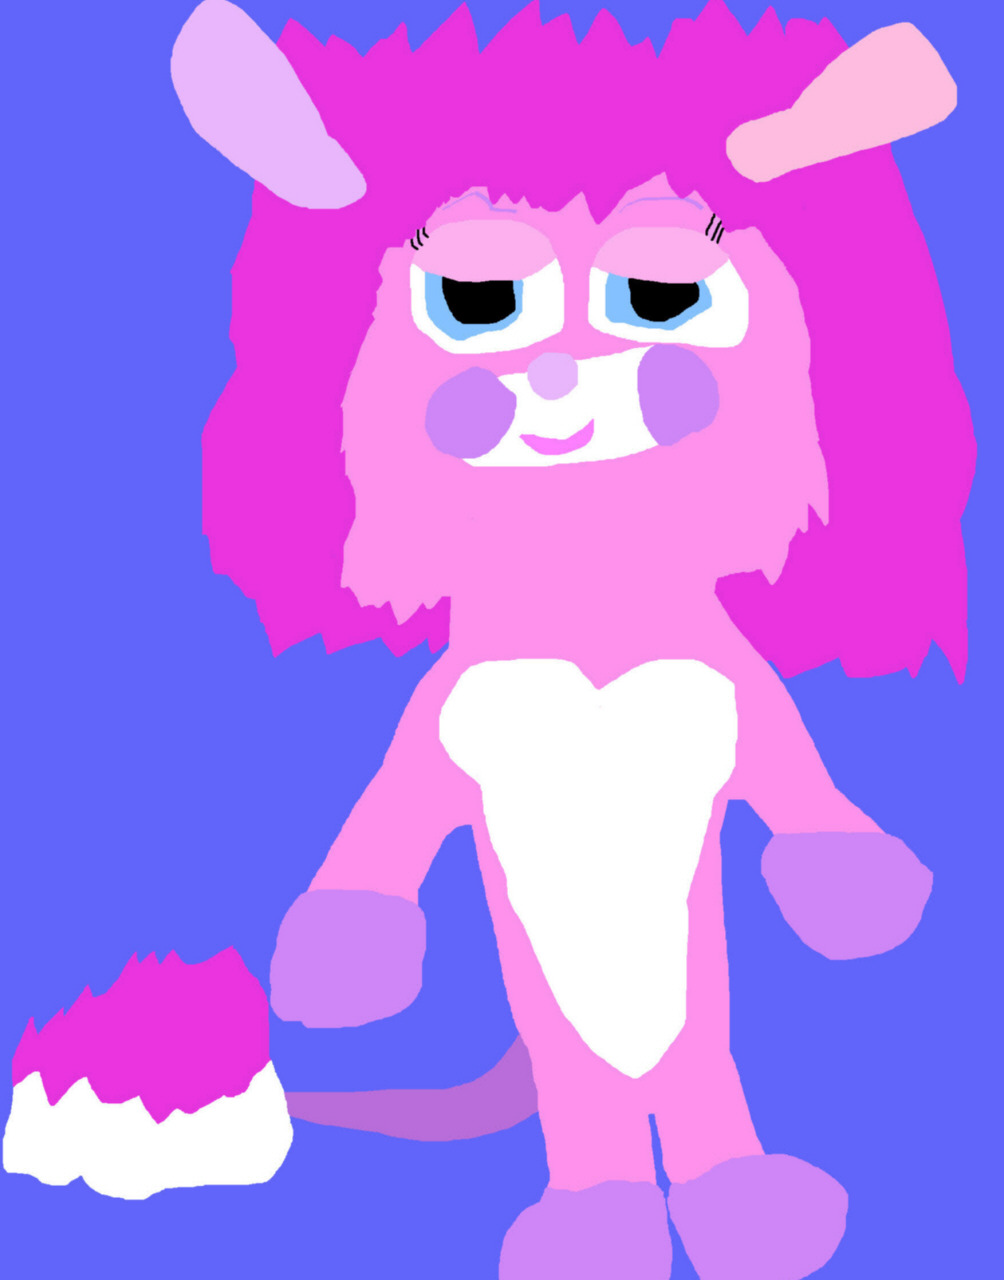 Late Night Party Popple Anthroish MS Paint by Falconlobo